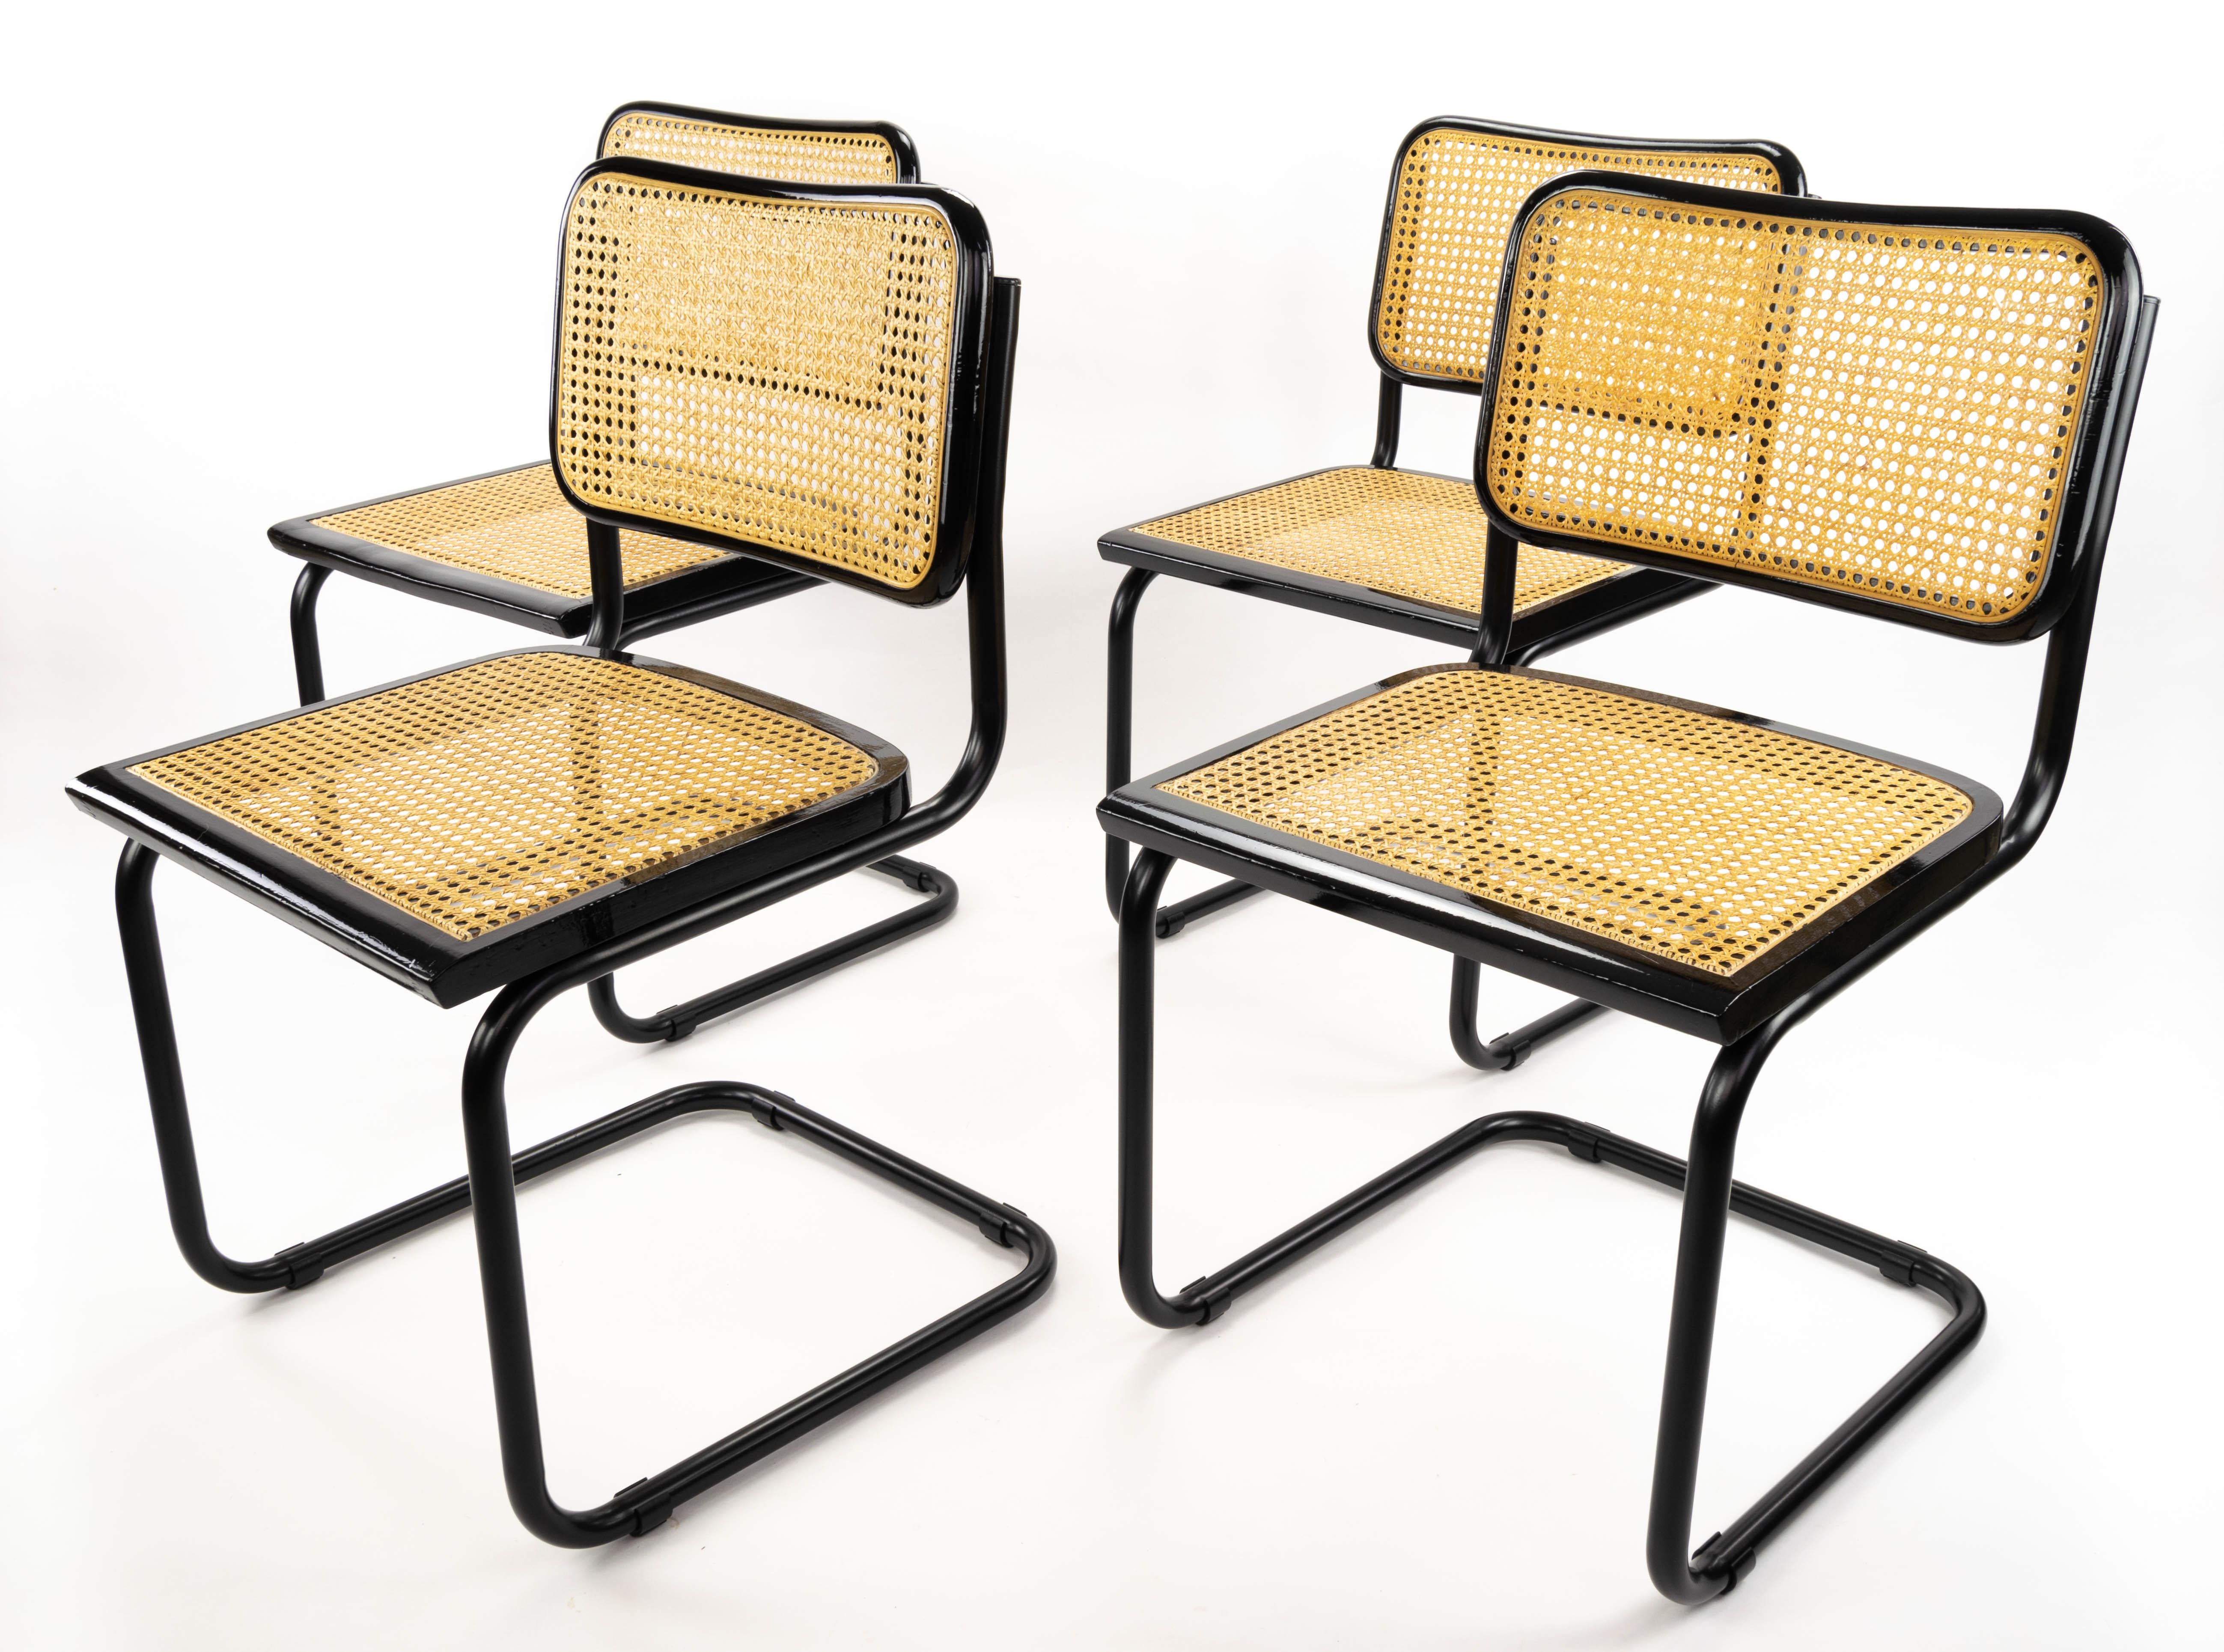 Set of four Cesca chairs, model B32. Tubular structure in black lacquered steel in excellent condition. Beech wood frames lacquered in black and Viennese natural grid. Grids of the four seats have been put new.
Measurements:
Total height 83.5